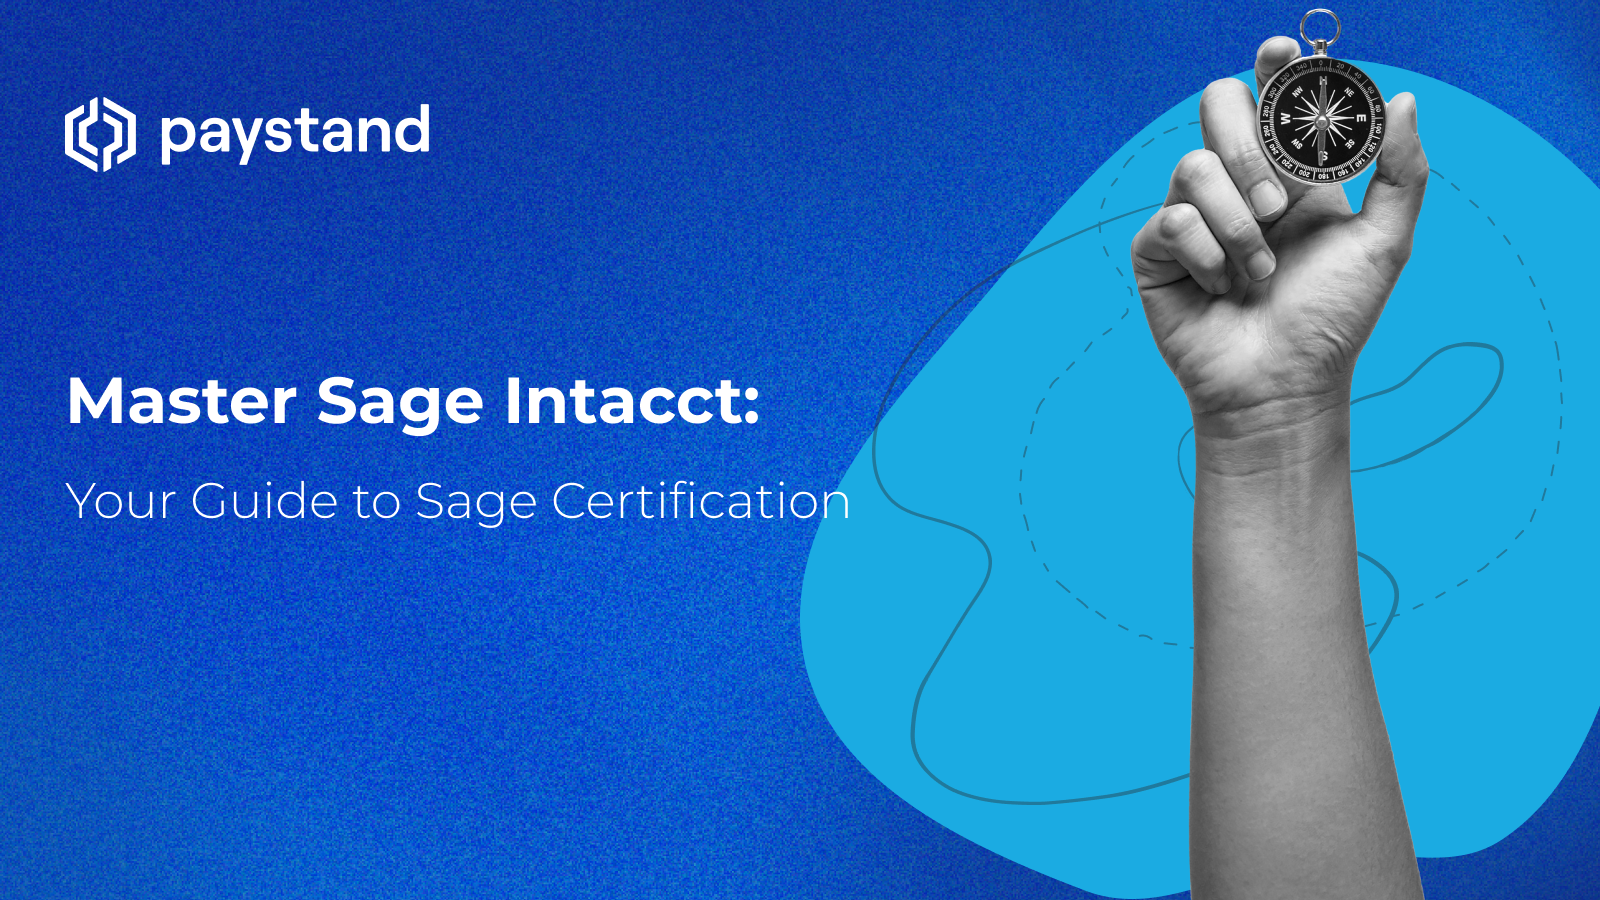 Master Sage Intacct: Your Guide to Sage Certification